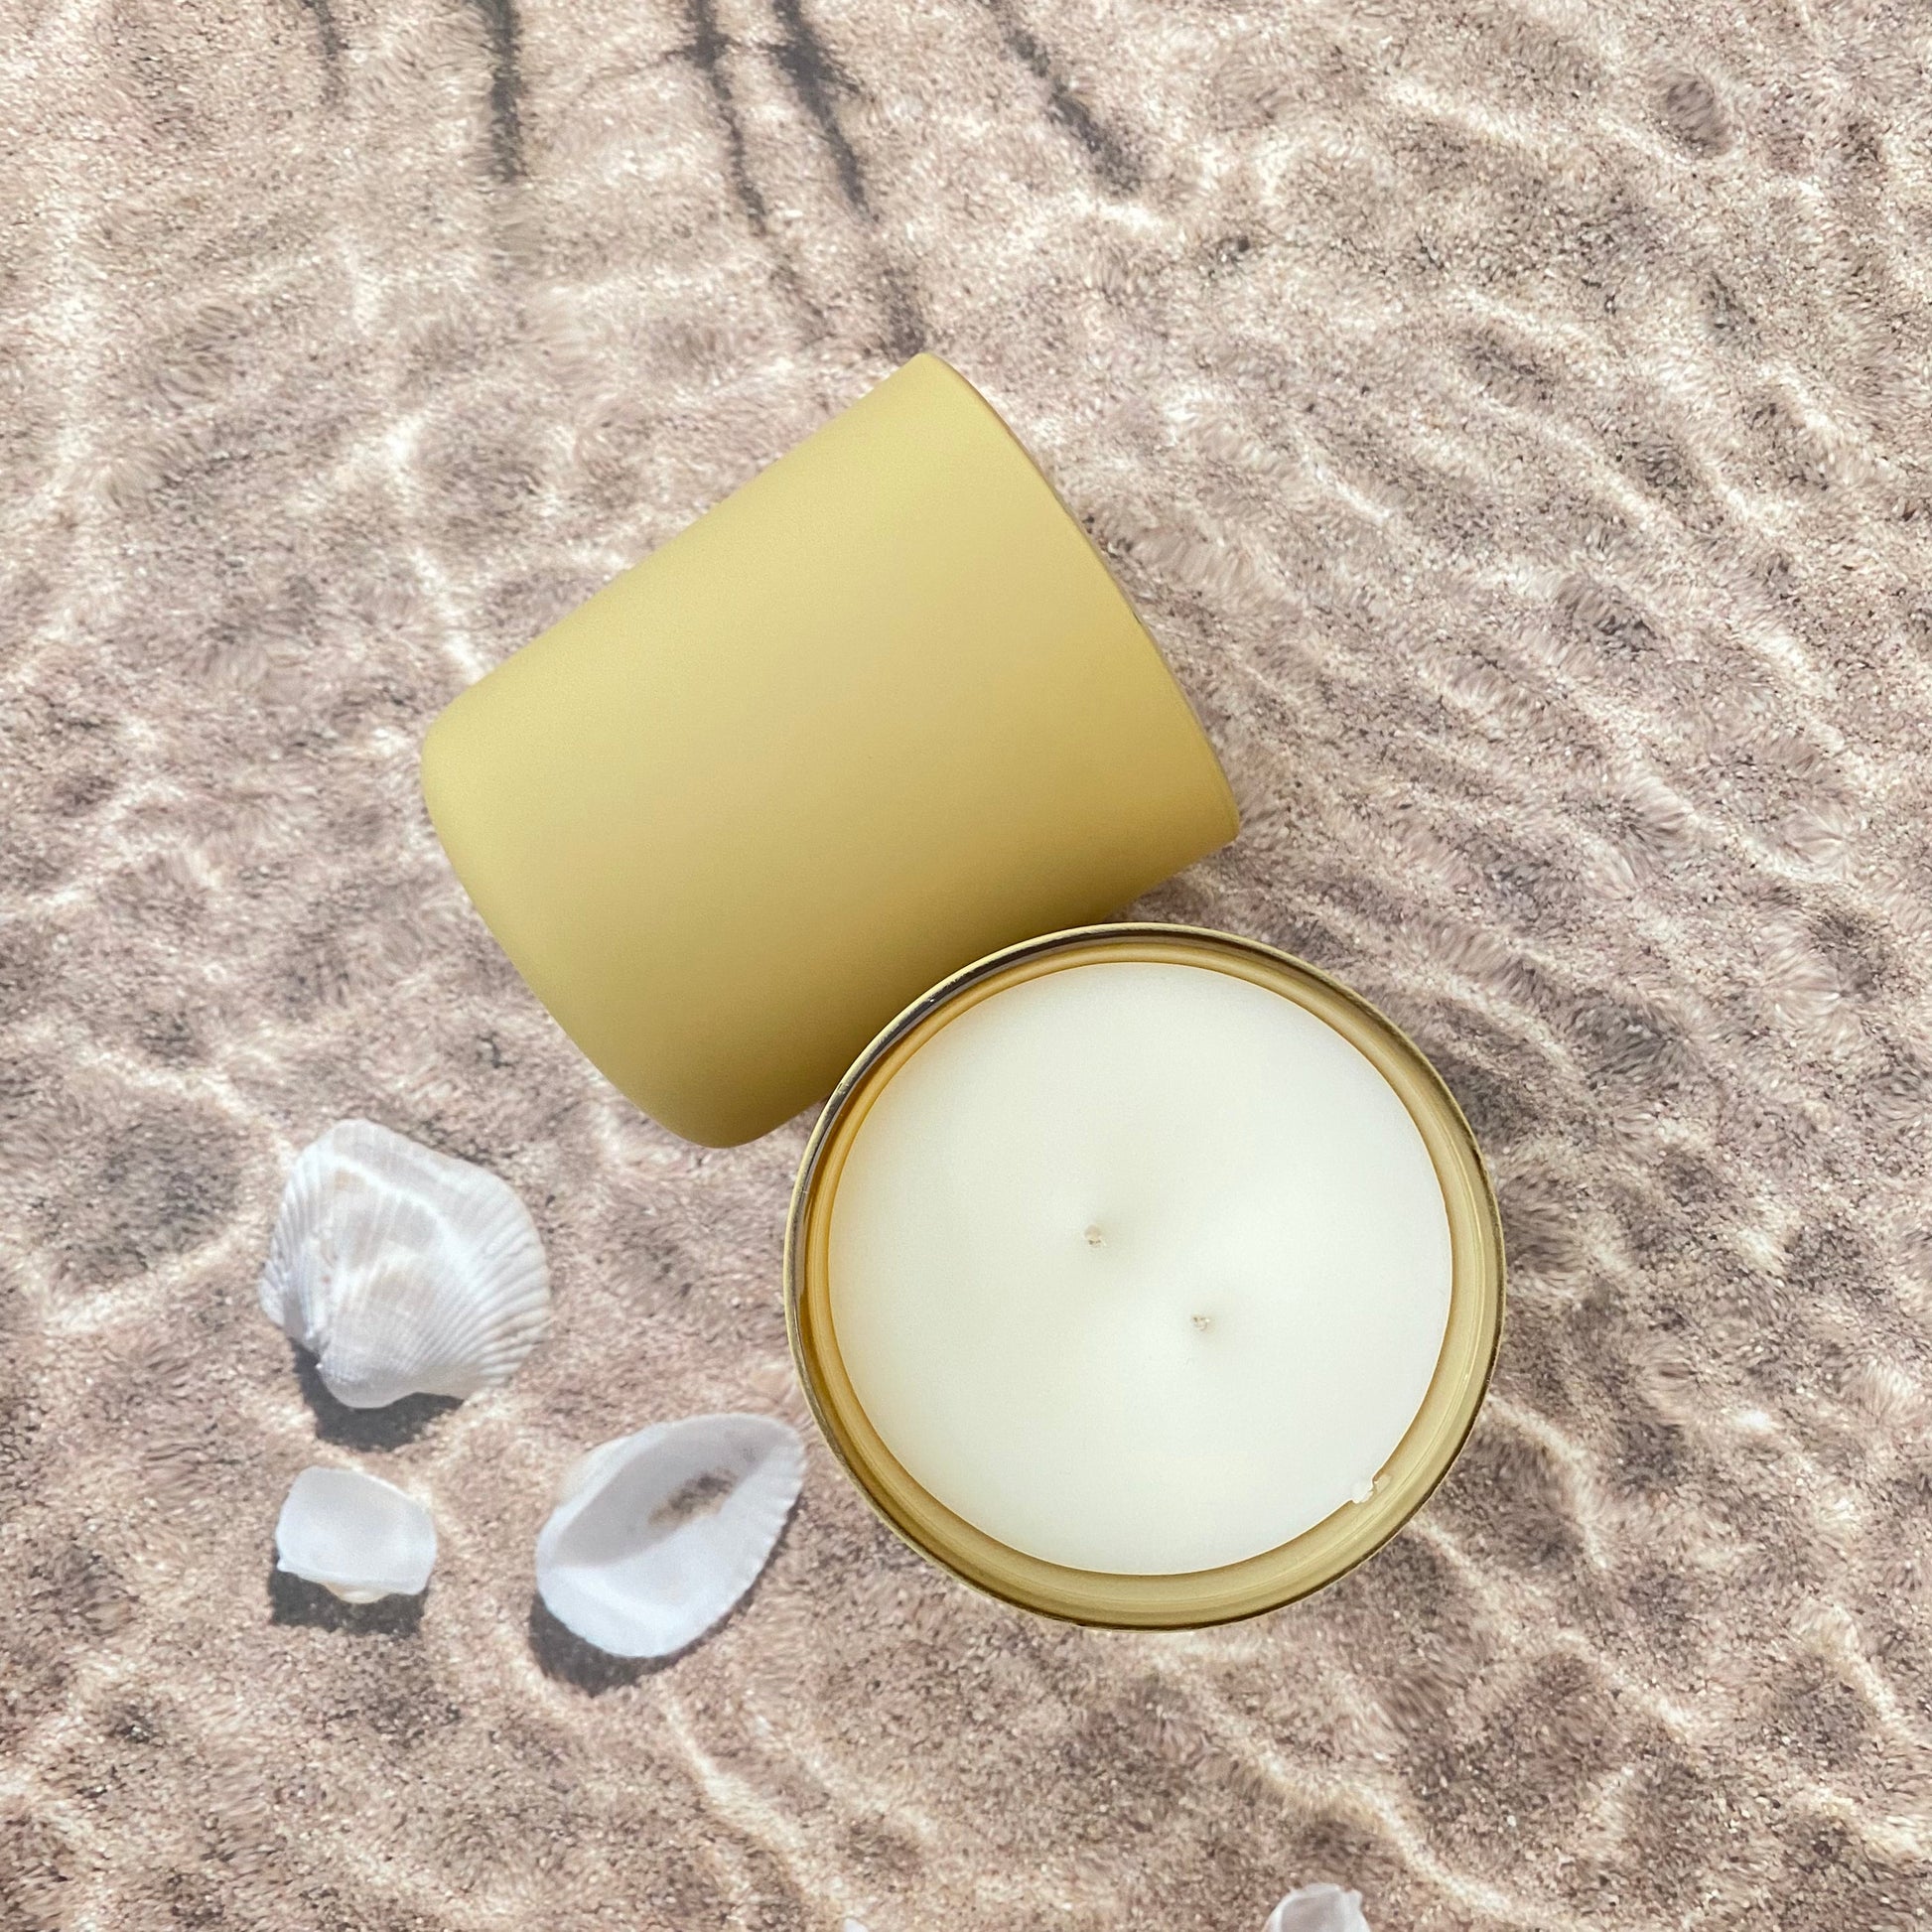 Island Getaway Stress Relief Candle Scents of Vanilla Mint-0